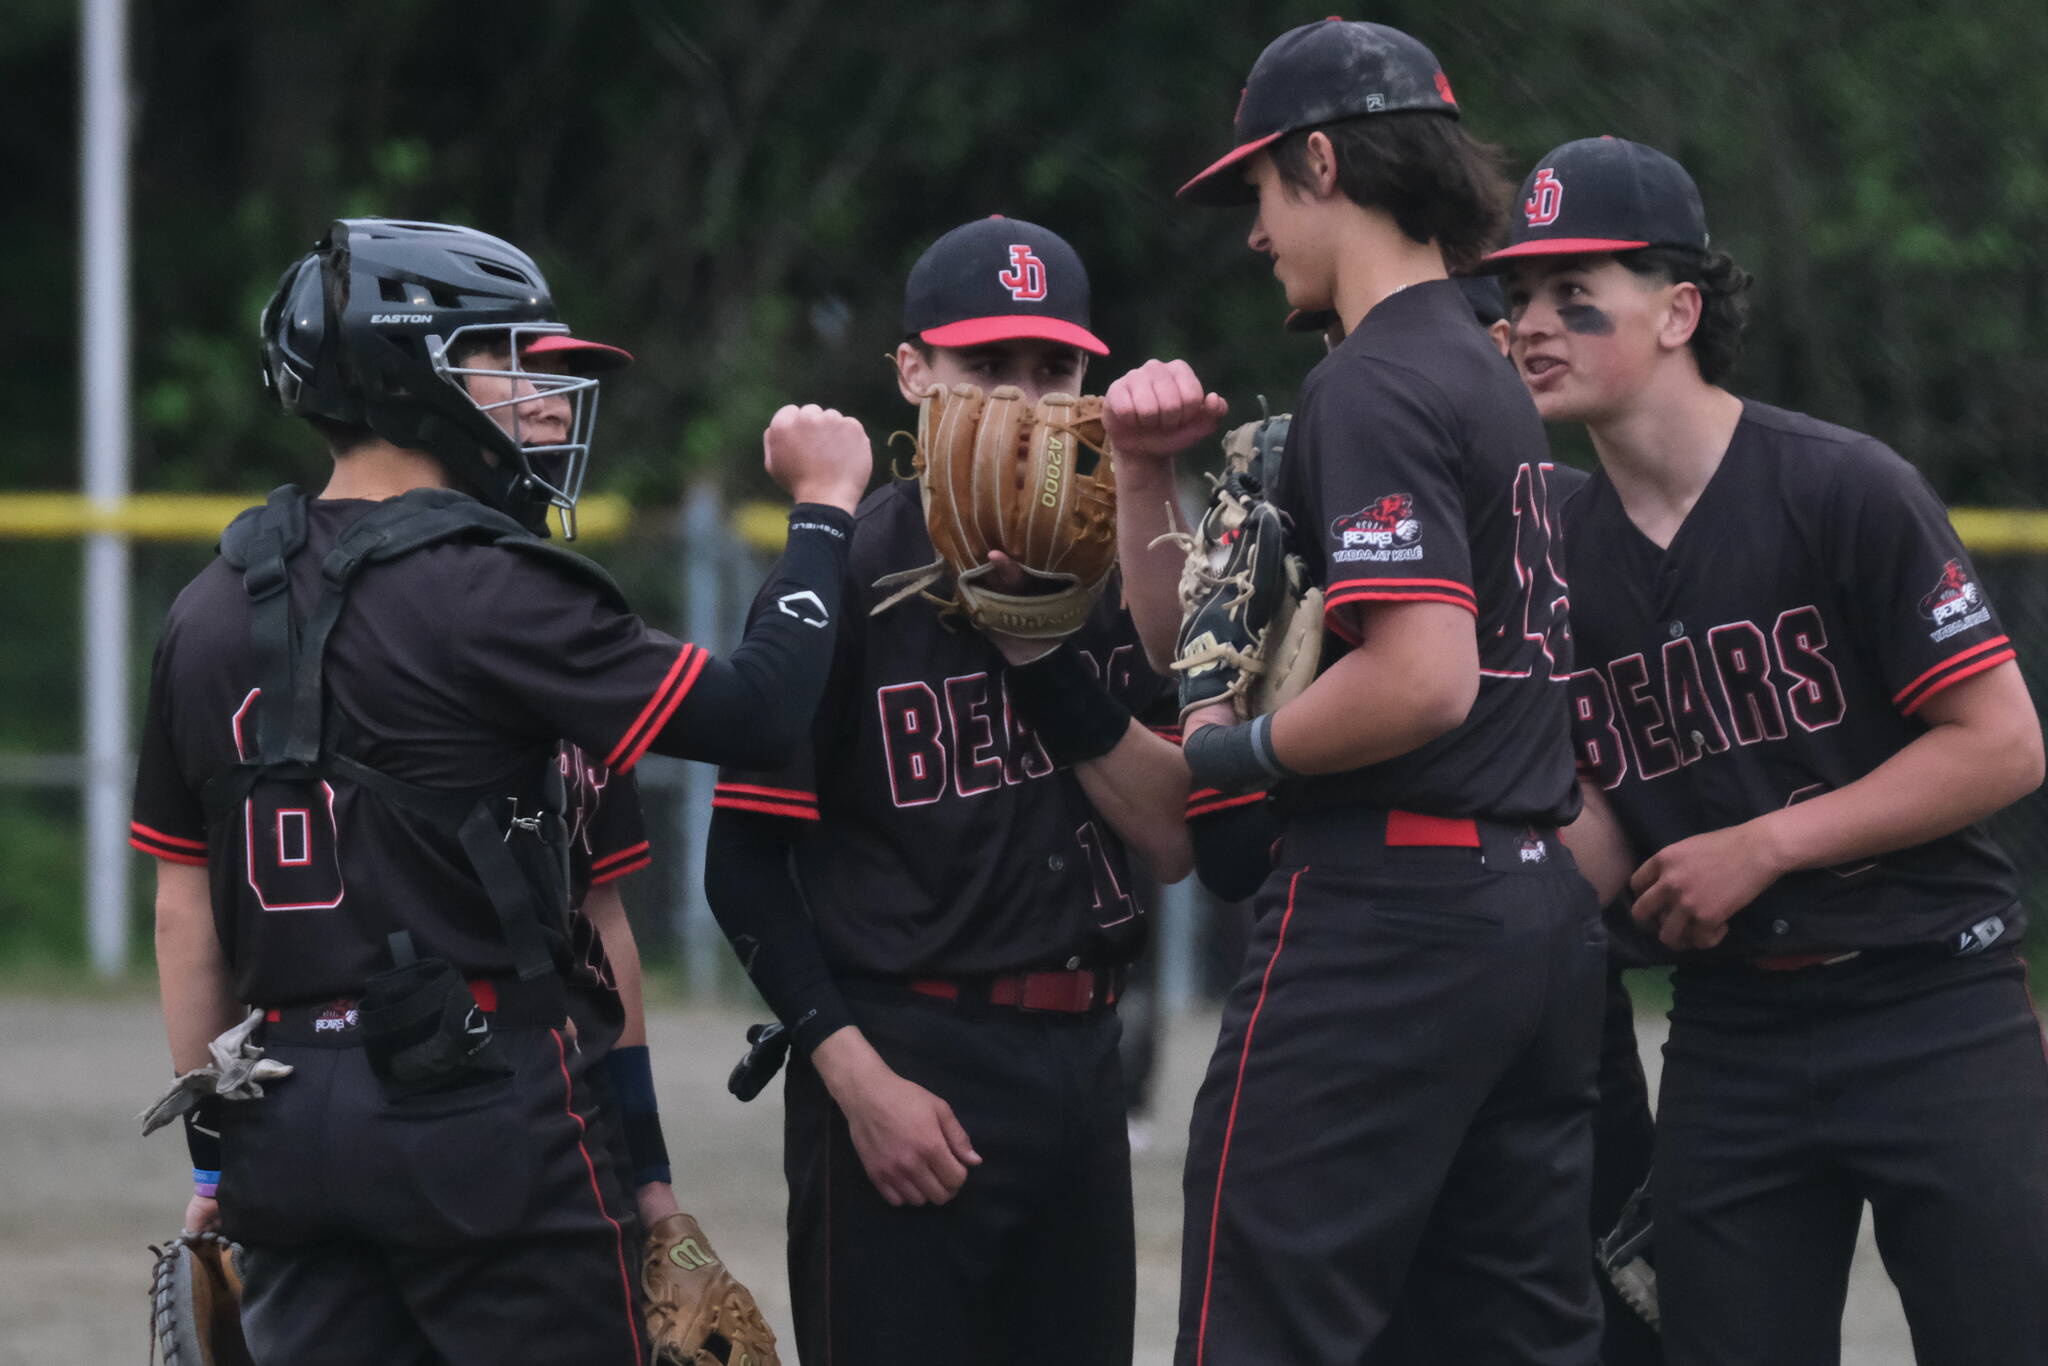 Juneau-Douglas High School: Yadaa.at Kalé senior battery Lamar Blatnick (catcher) and Landon Simonson (pitcher) bump fists on the mound with teammates as they begin their final home game at Adair-Kennedy Field on Saturday. (Klas Stolpe / For the Juneau Empire)